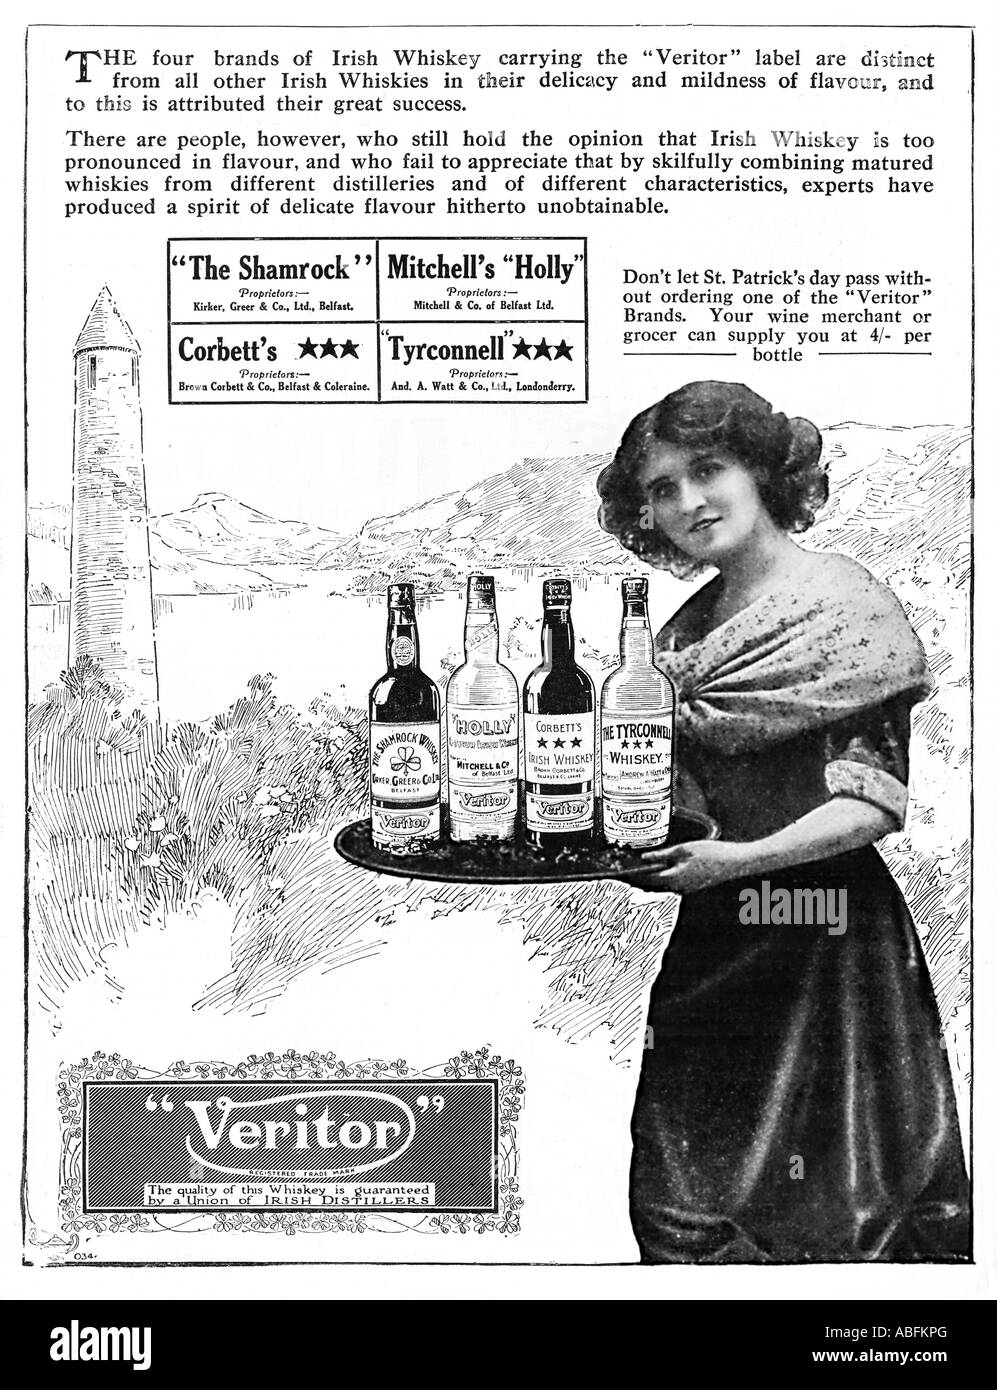 Veritor Irish Whiskey 1912 advert for the four brands of blended whiskey produced in Ulster distinctive by their delicacy Stock Photo